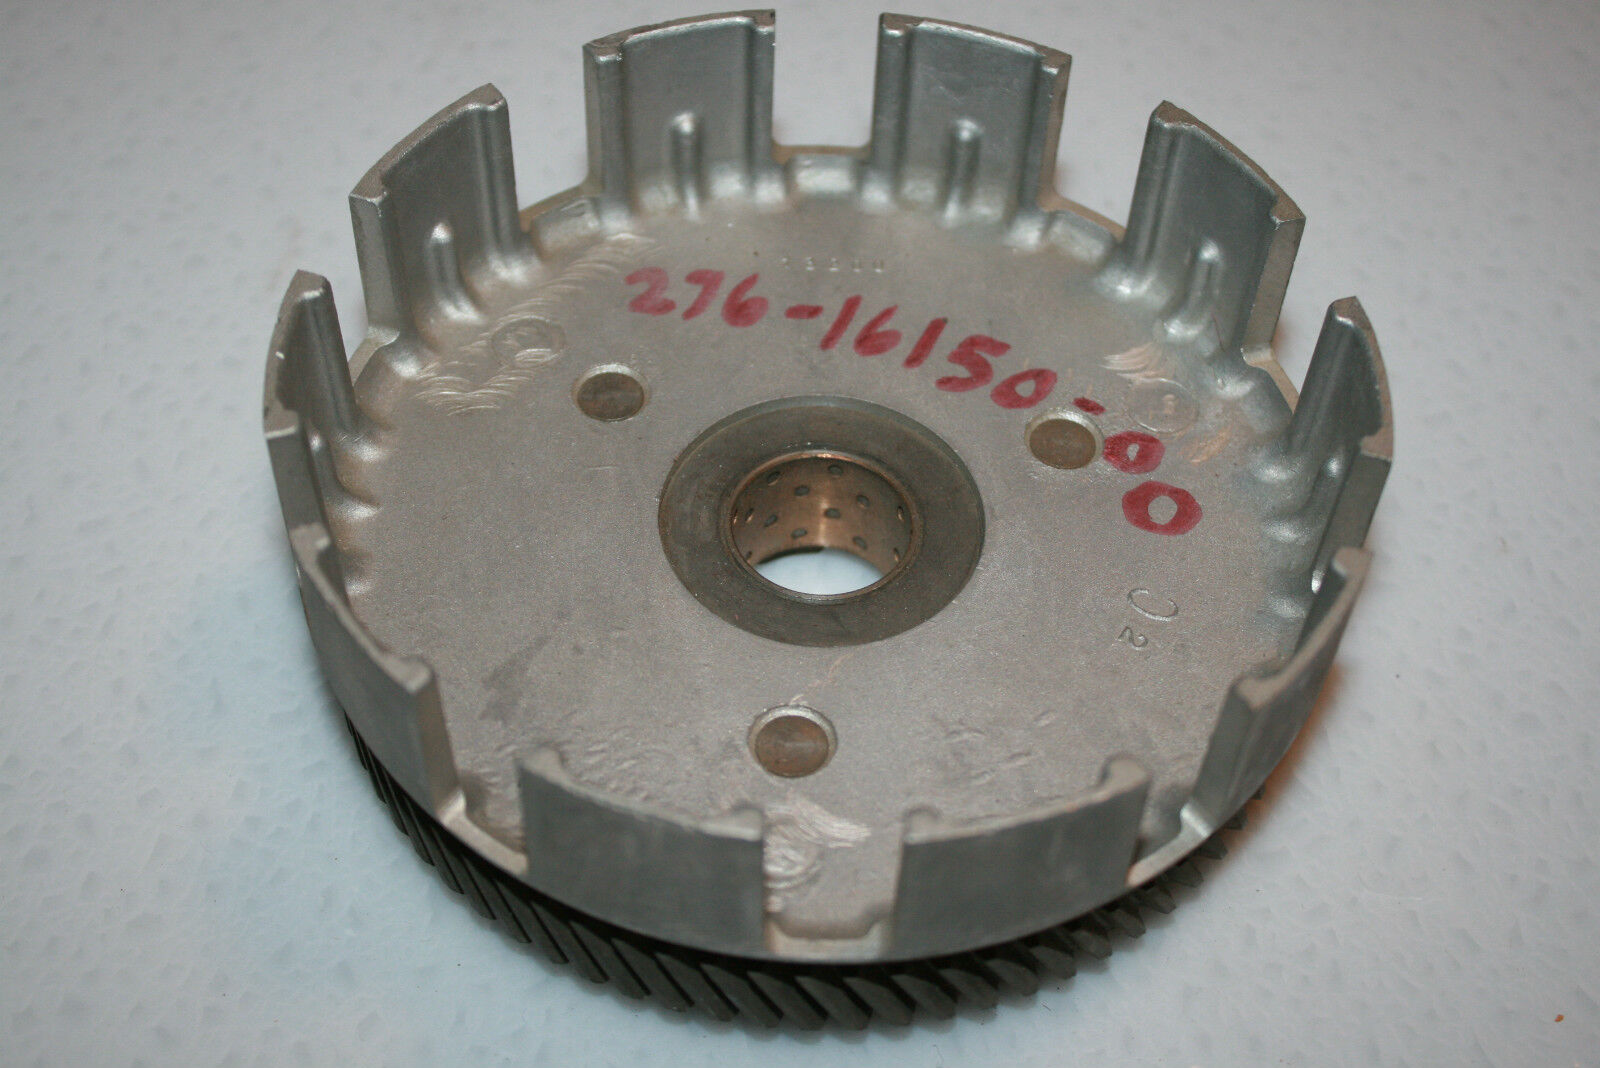 nos Very popular Yamaha motorcycle clutch basket primary driven Topics on TV 1970-71 gear